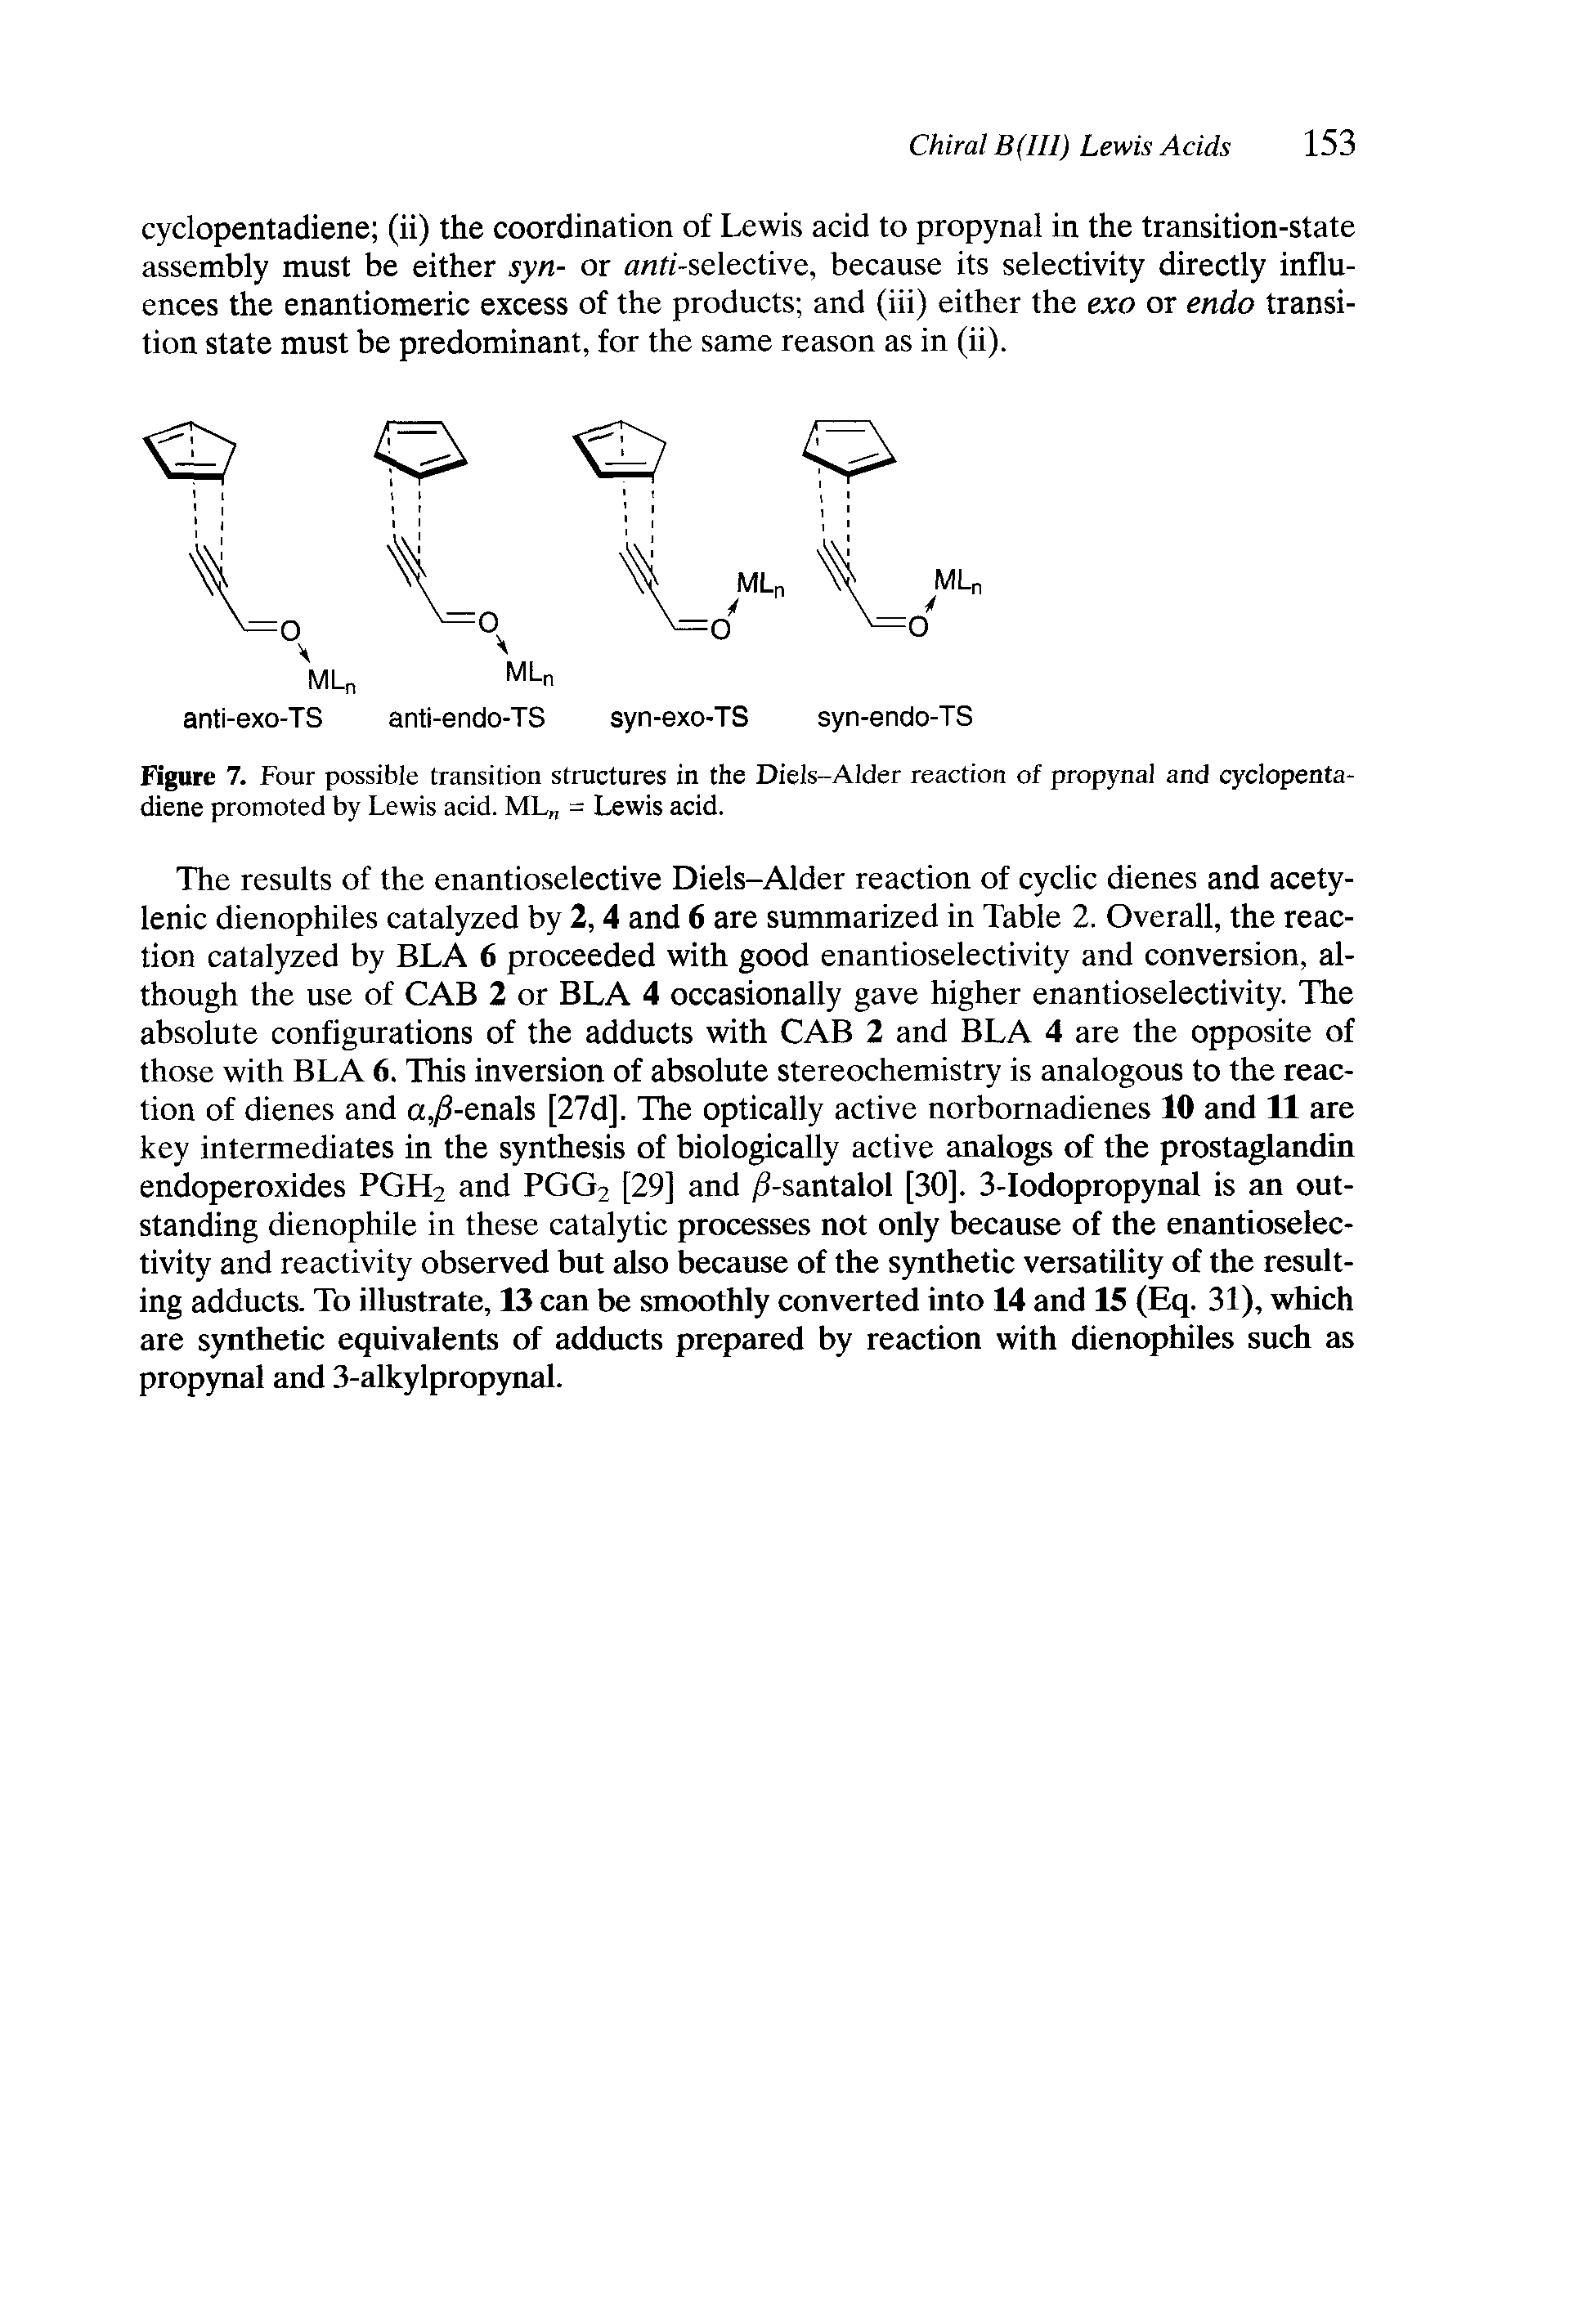 Figure 7. Four possible transition structures in the Diels-Alder reaction of propynal and cyclopentadiene promoted by Lewis acid. ML = Lewis acid.